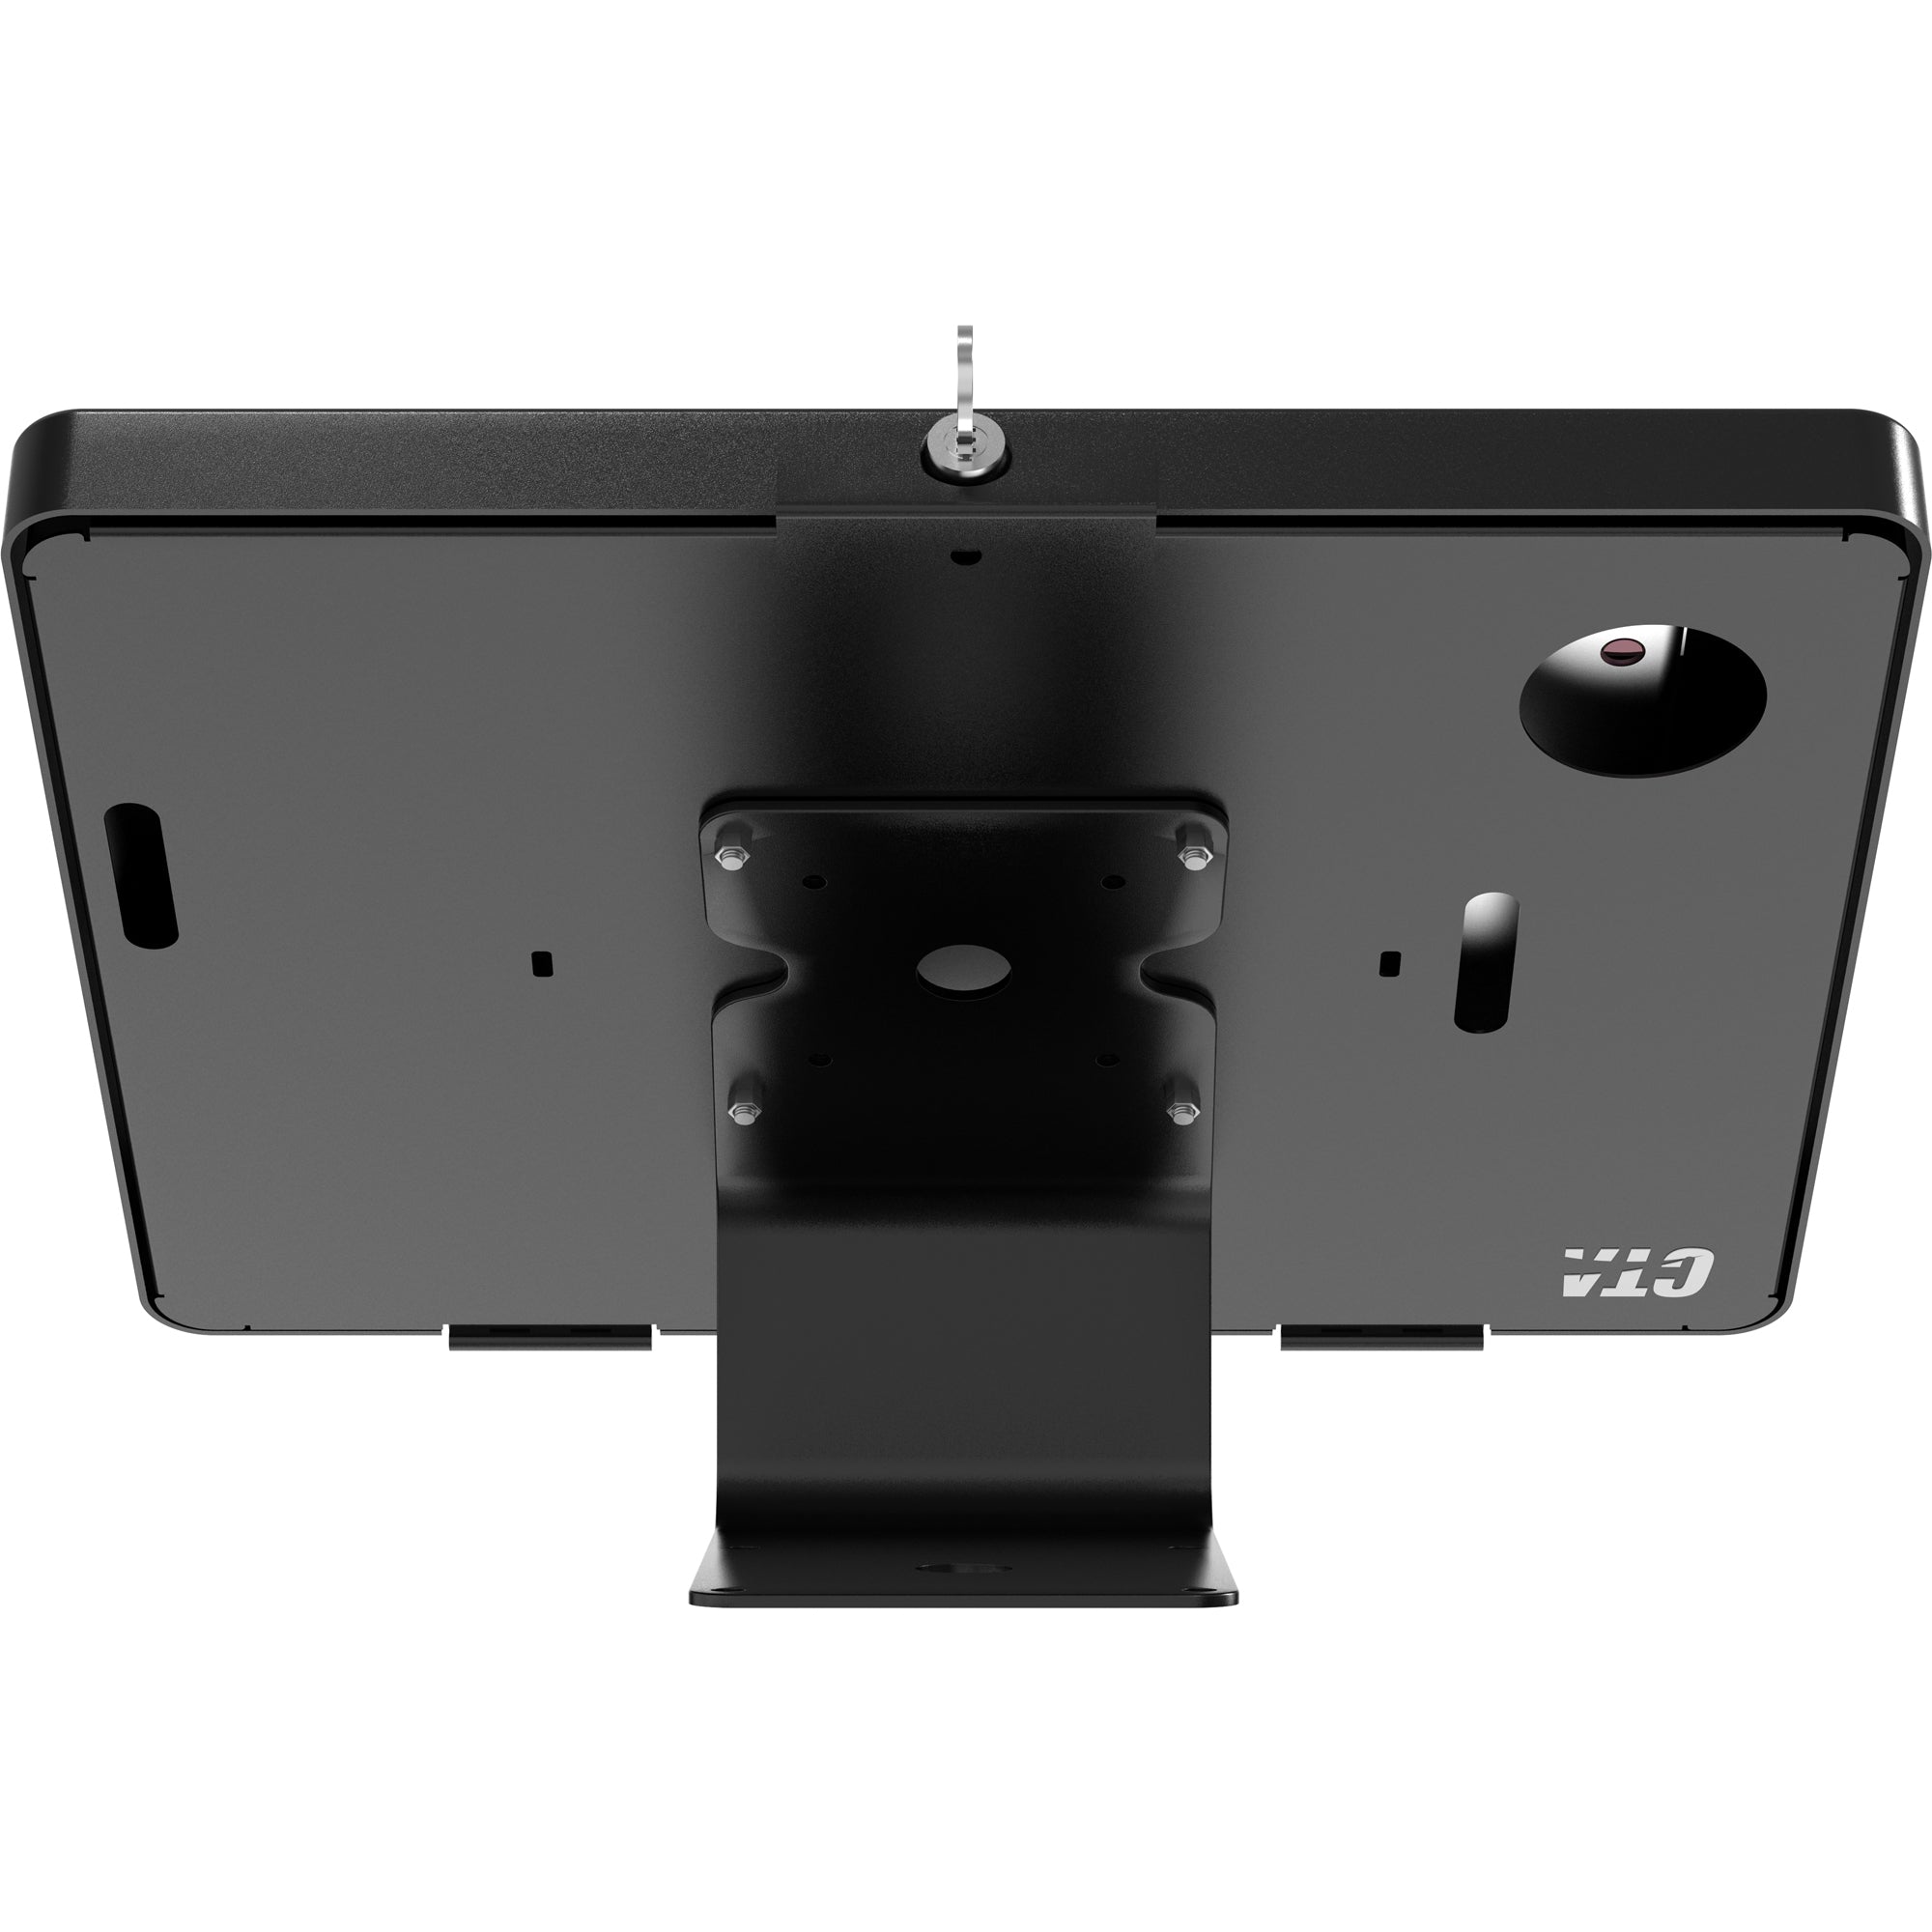 Curved Stand & Wall Mount With Paragon Enclosures